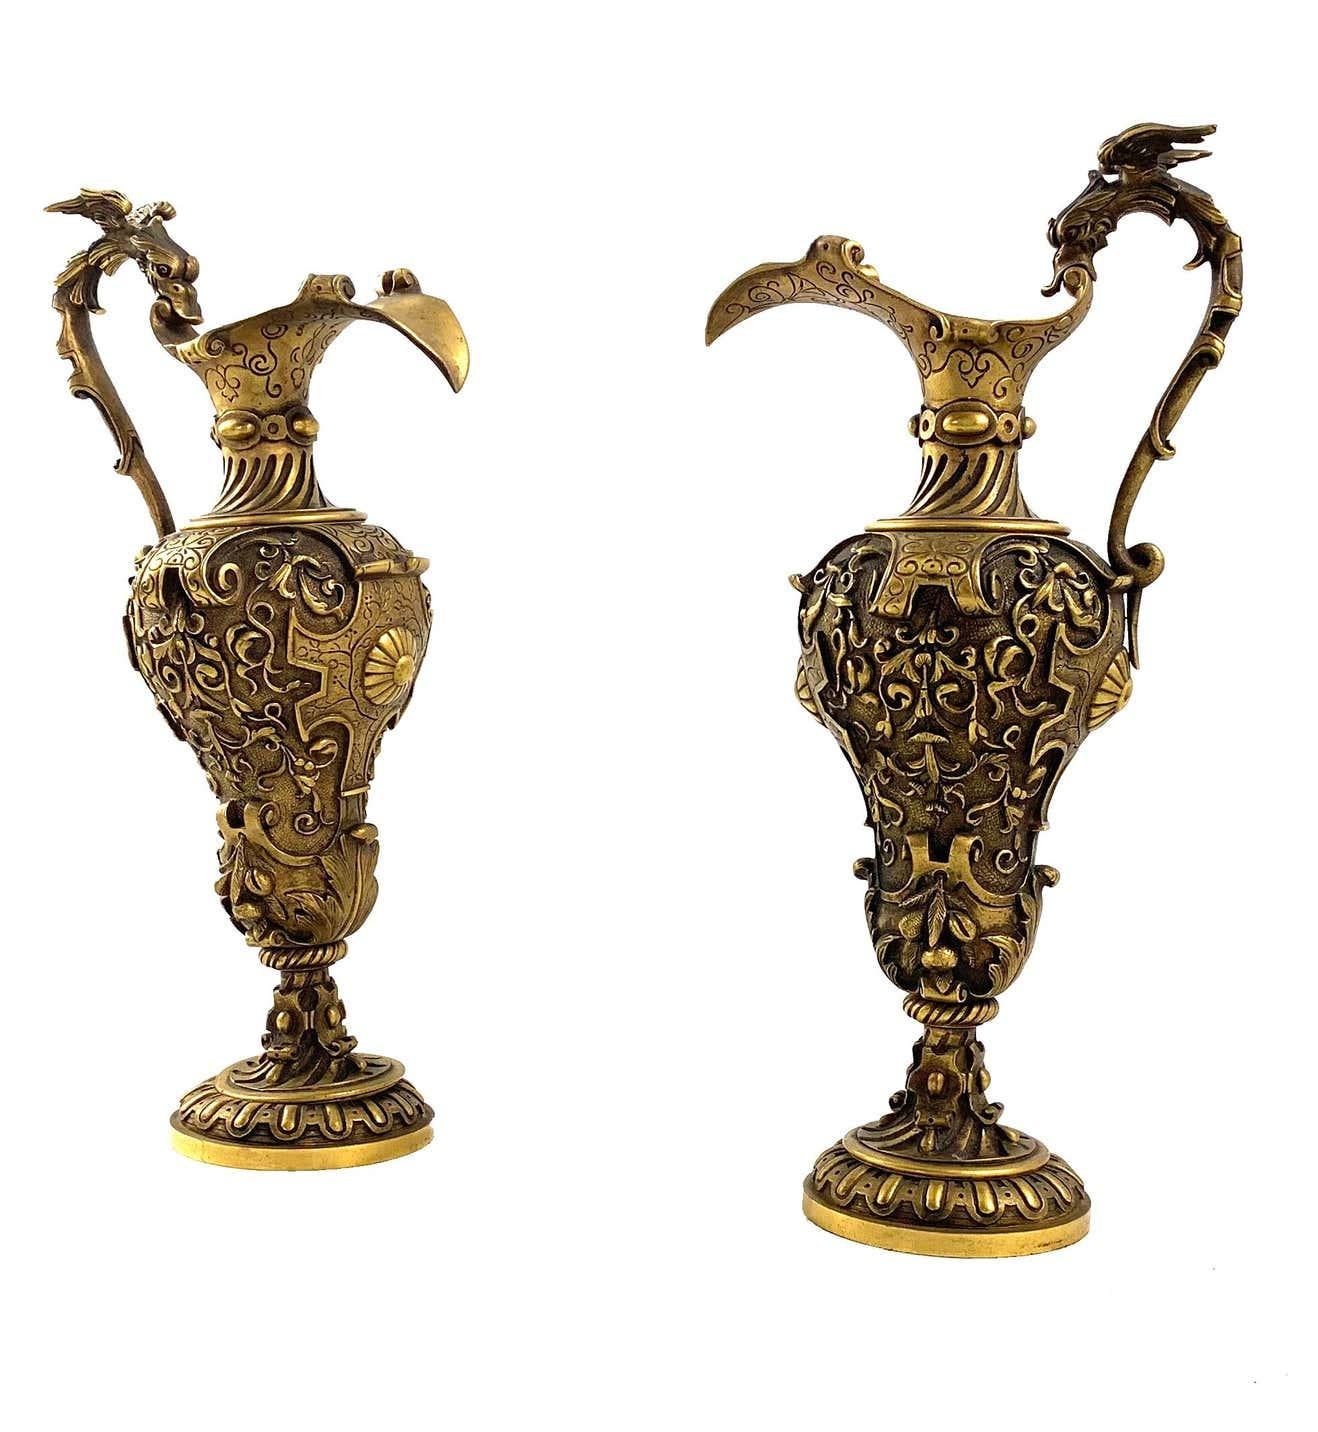 19th Century Pair of Italian Renaissance Revival Cast Gilt Bronze Ewers In Good Condition For Sale In Southall, GB